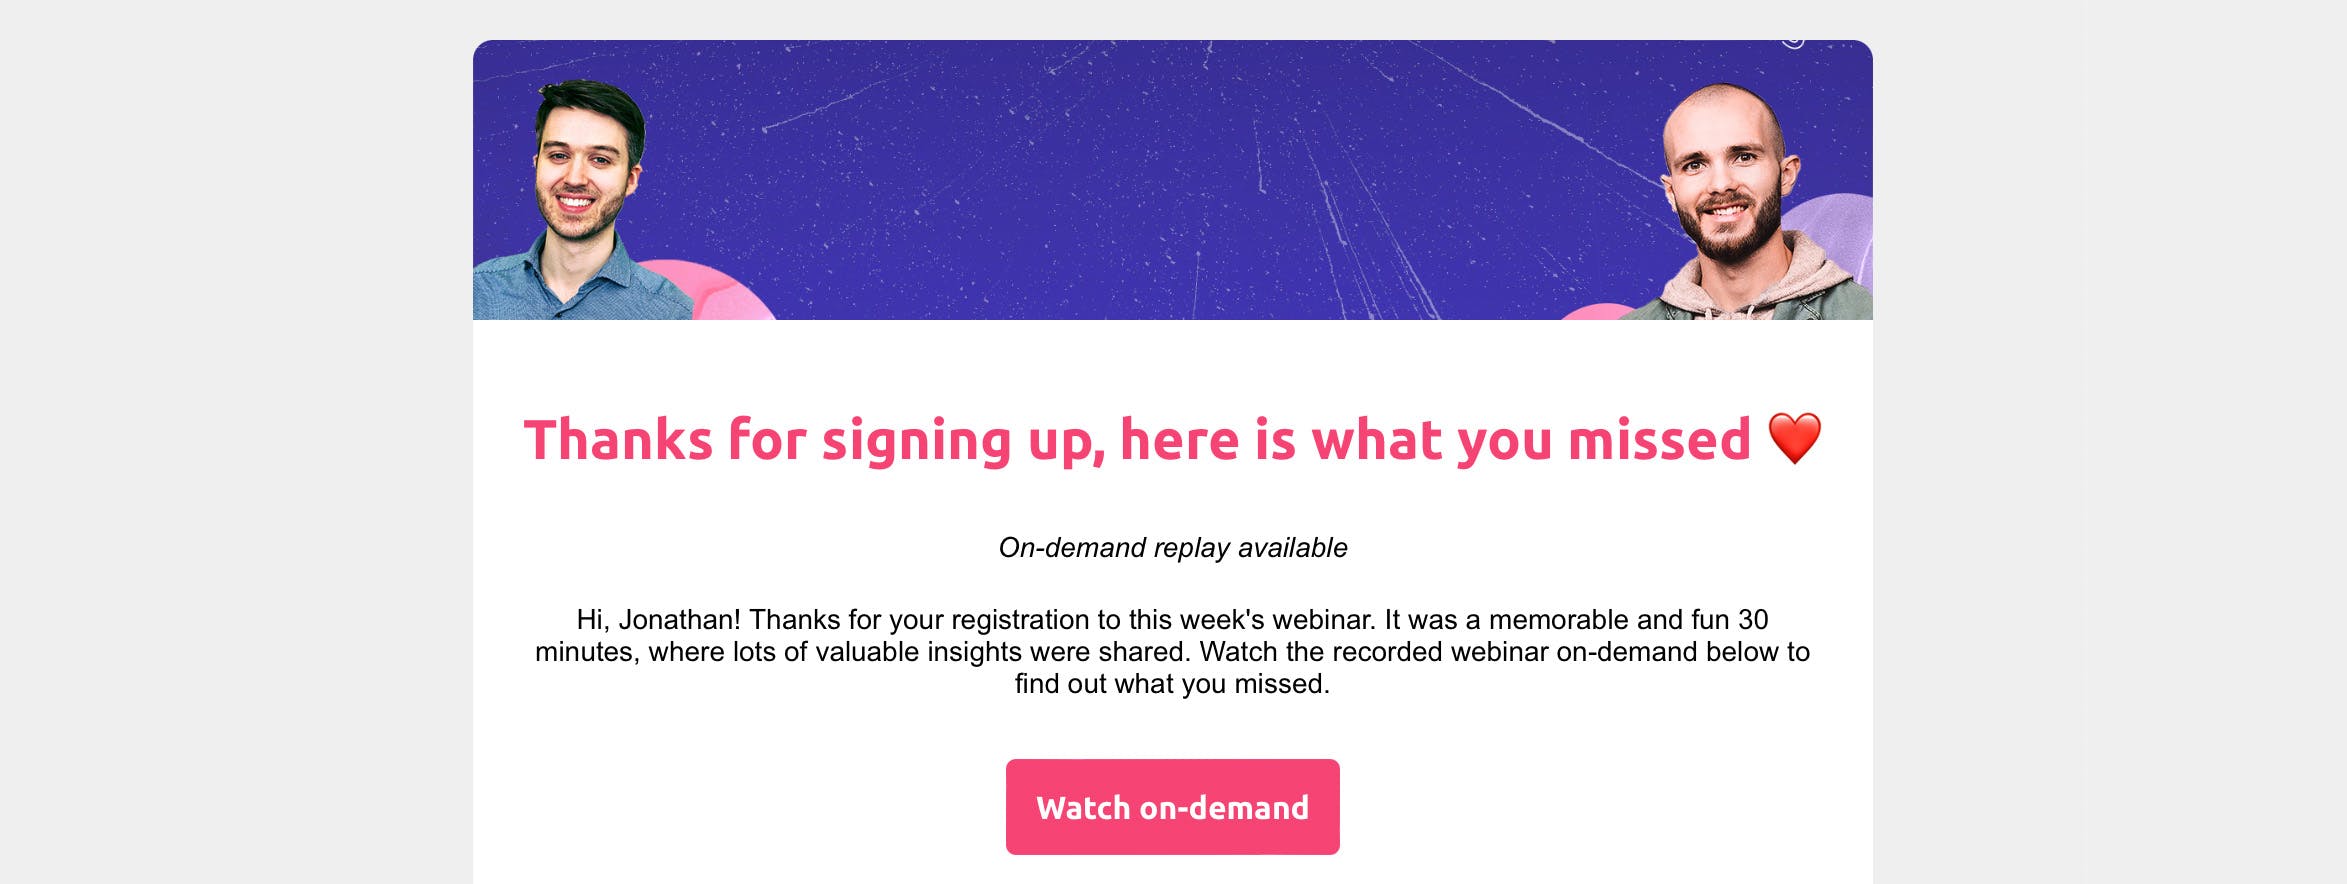 A webinar follow-up email example